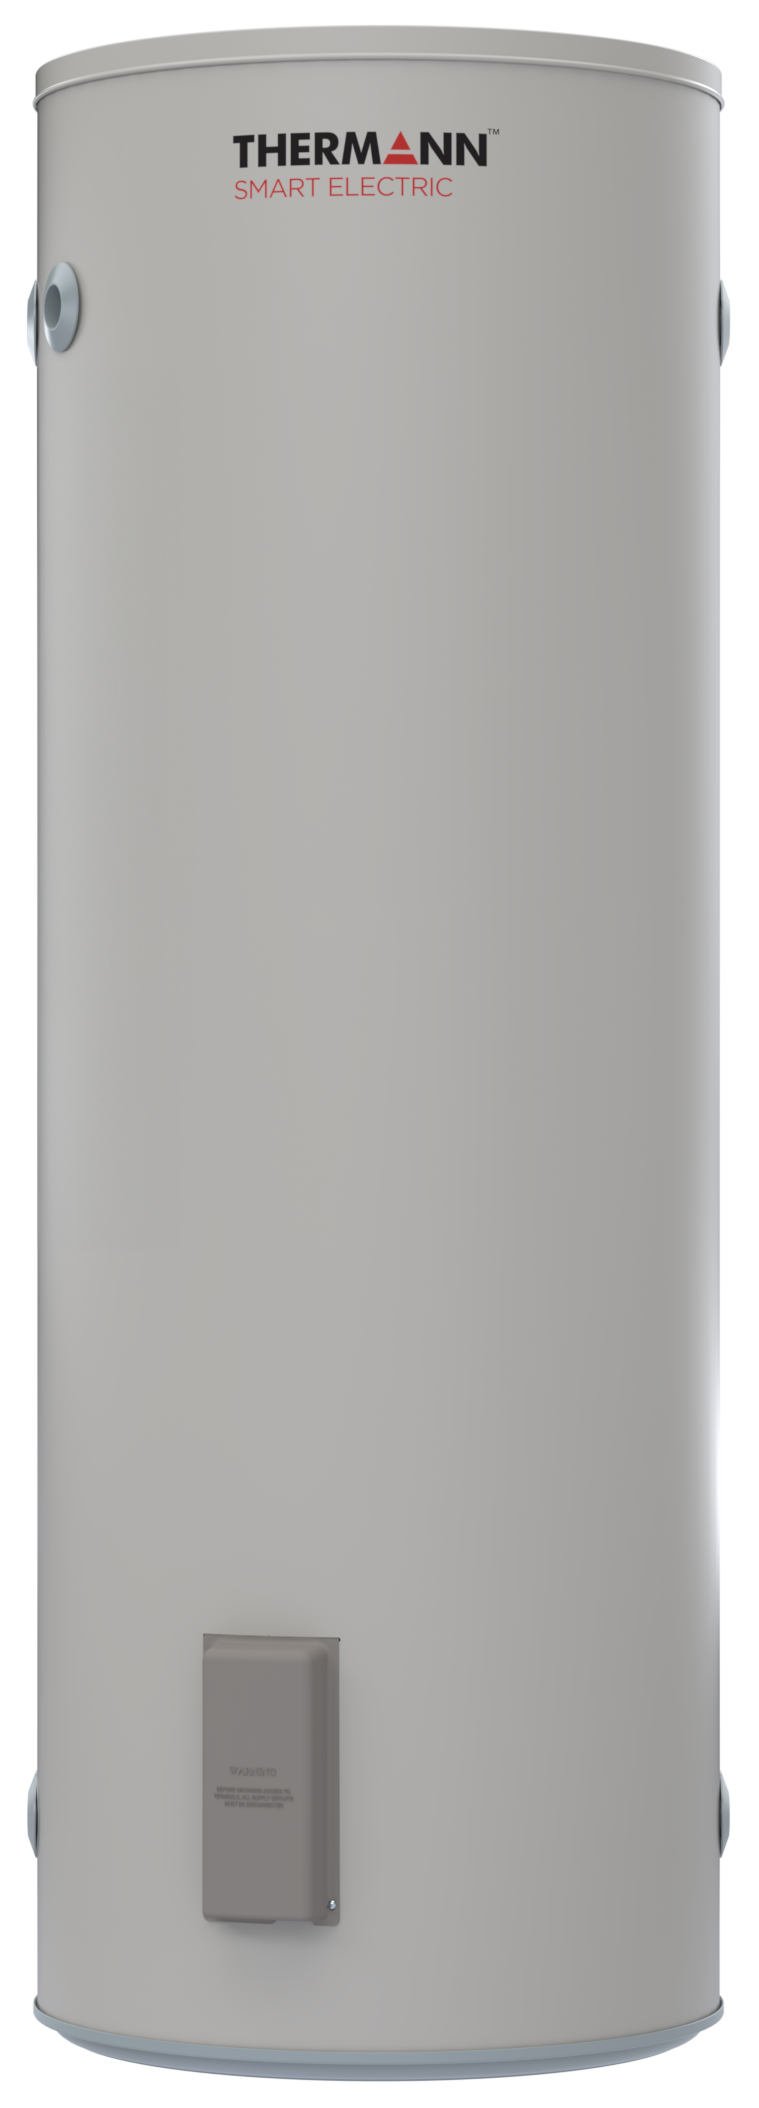 Thermann Smart Electric Hot Water Unit 315L